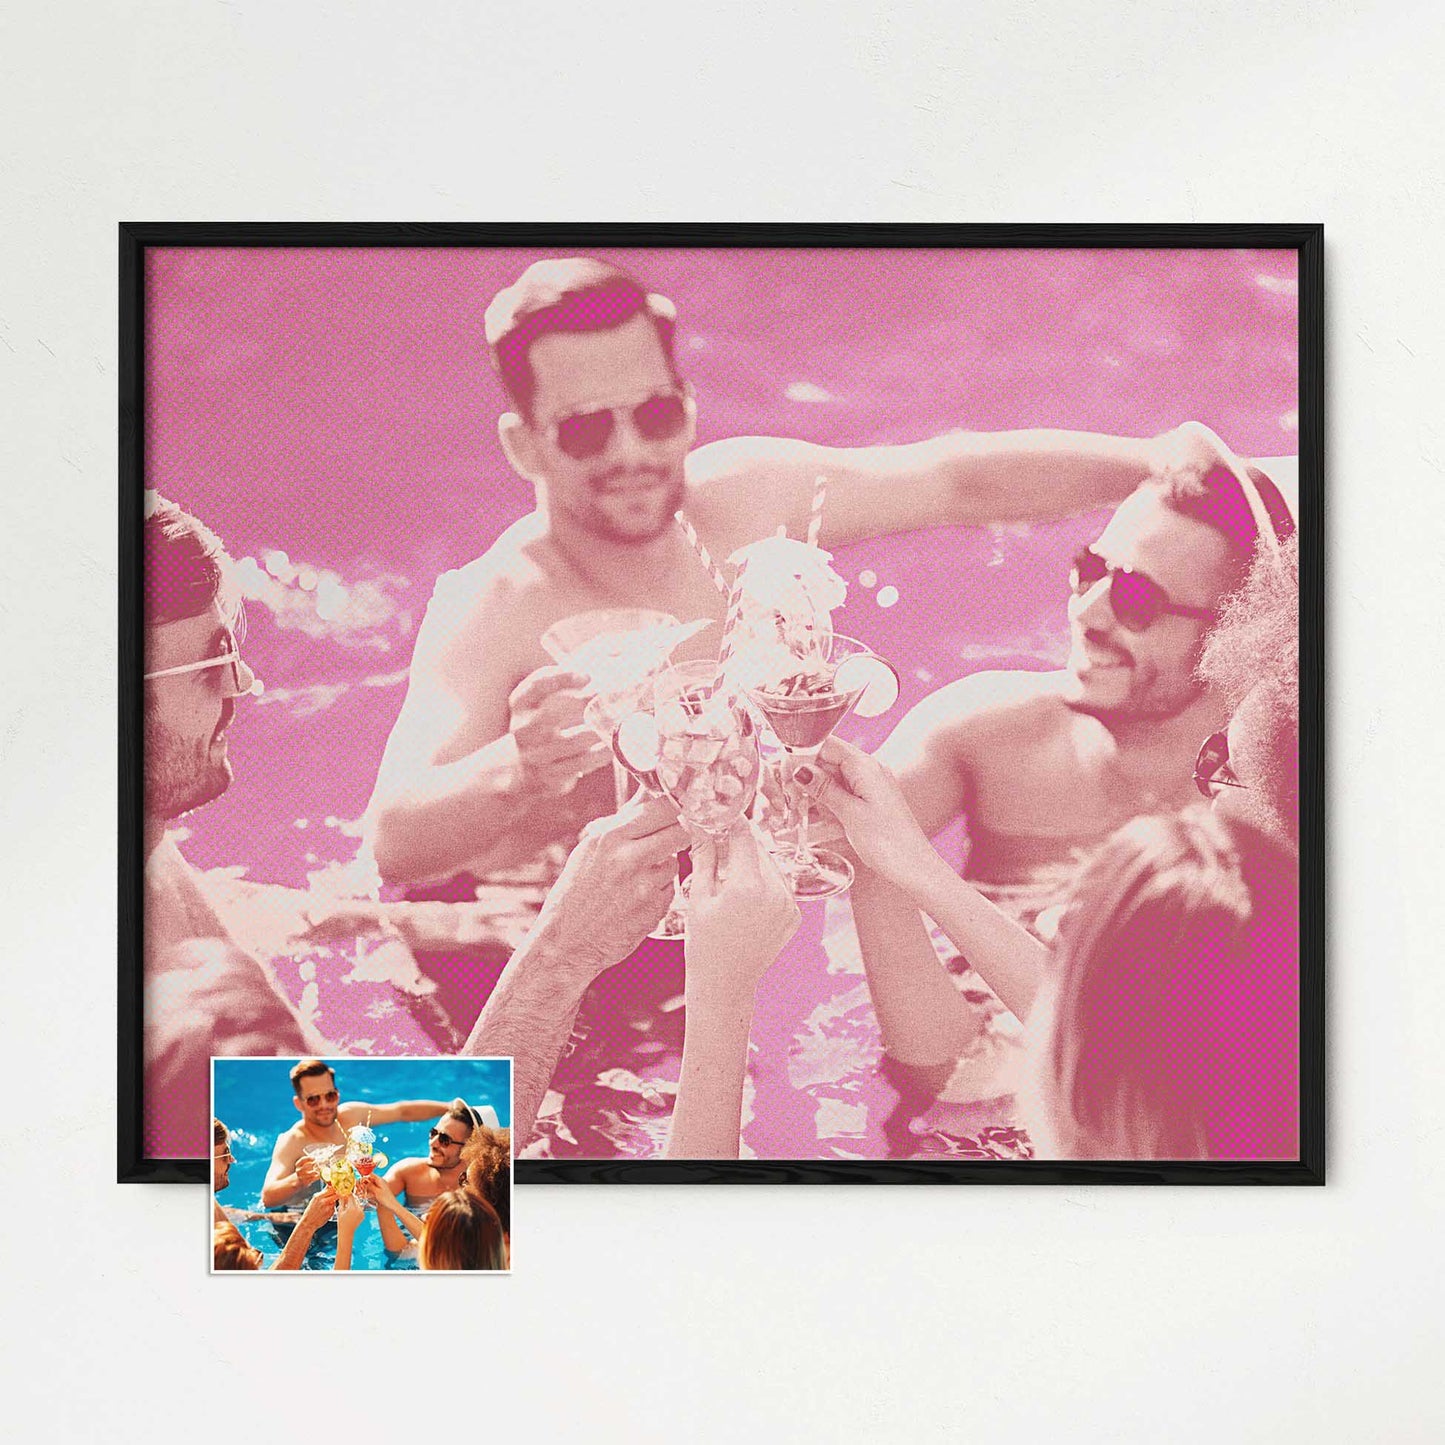 Transform your space with the Personalised Pink Pop Art Framed Print, a cool and vibrant piece inspired by pop art. Its halftone effect and vivid colors create a lively and exciting atmosphere. Crafted with a wooden frame and gallery-quality